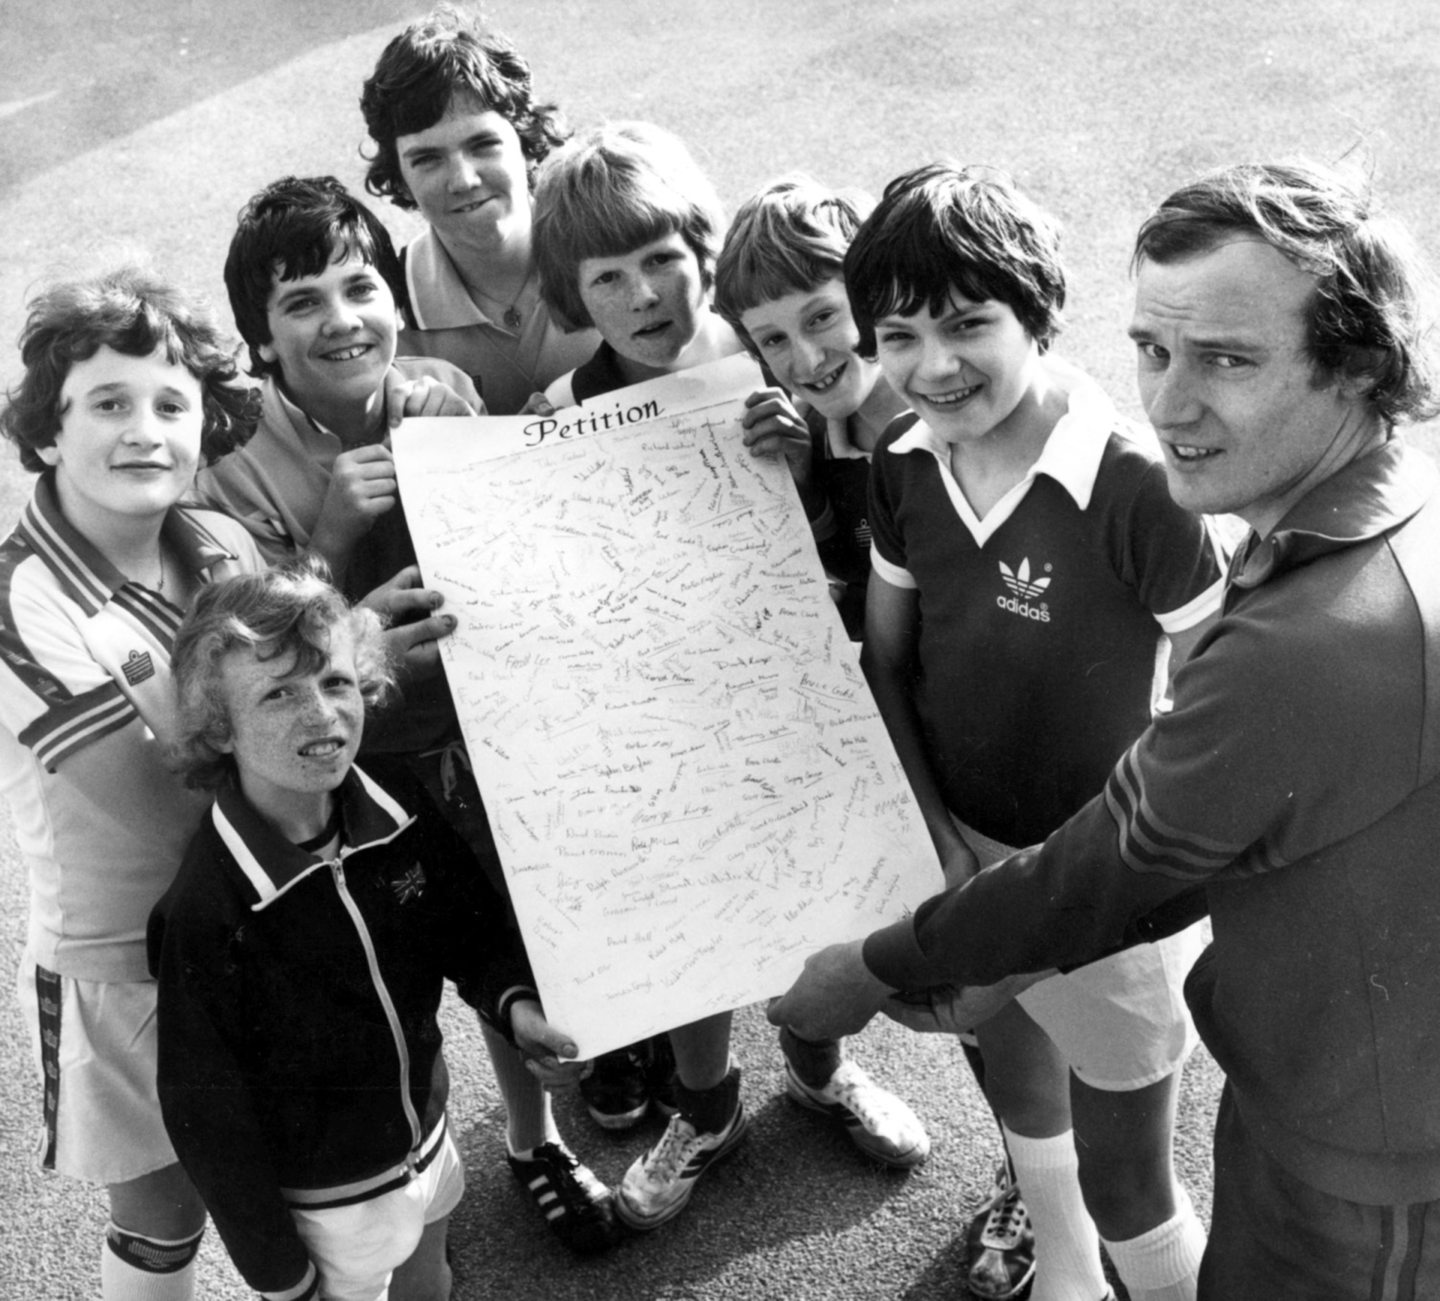 A petition of protests containing 200 names was handed over to Grampian Regional Council's director of education football-loving pupils at Aberdeen Grammar and Hazlehead Academy in 1978. Pictured with the petition are Grammar School boys and secretary to the Grampian Union of Boys' Clubs, Neil Paterson.